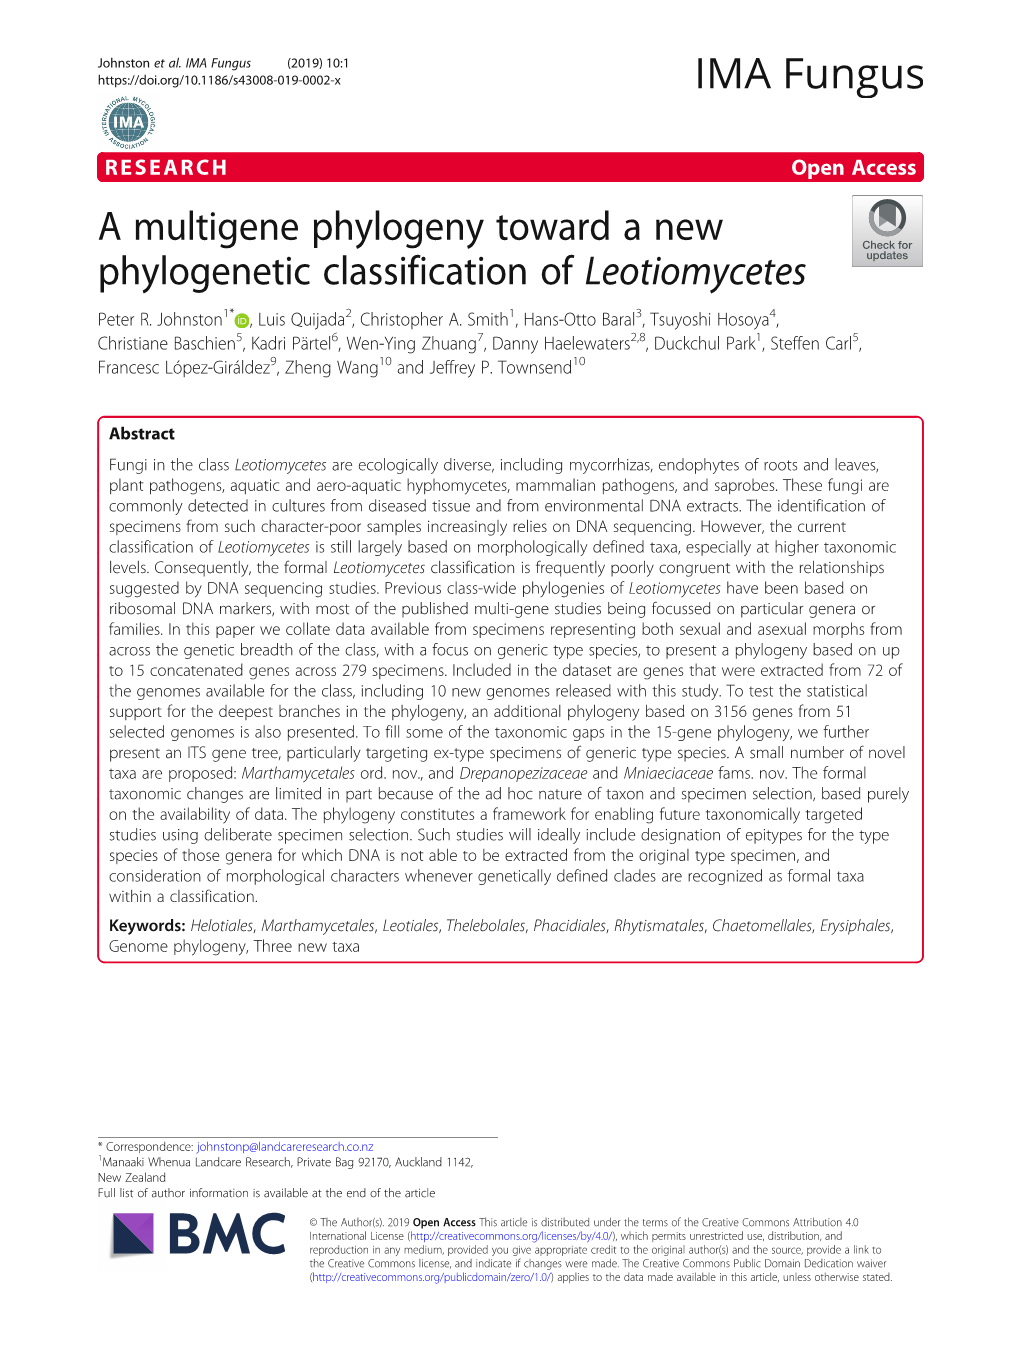 A Multigene Phylogeny Toward a New Phylogenetic Classification of Leotiomycetes Peter R